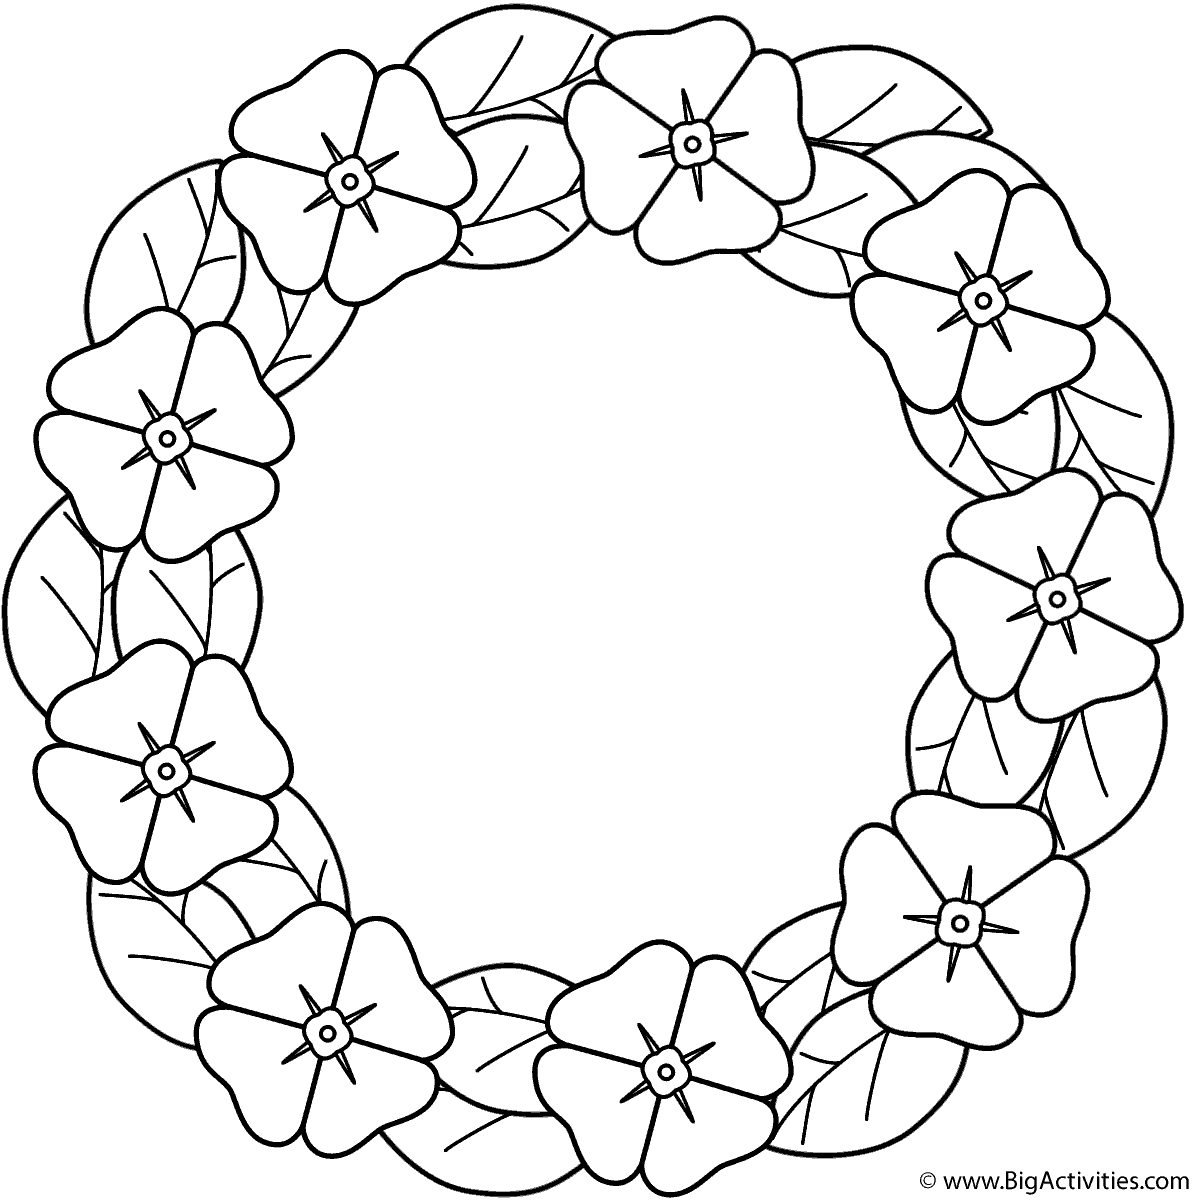 poppy-wreath-coloring-page-memorial-day